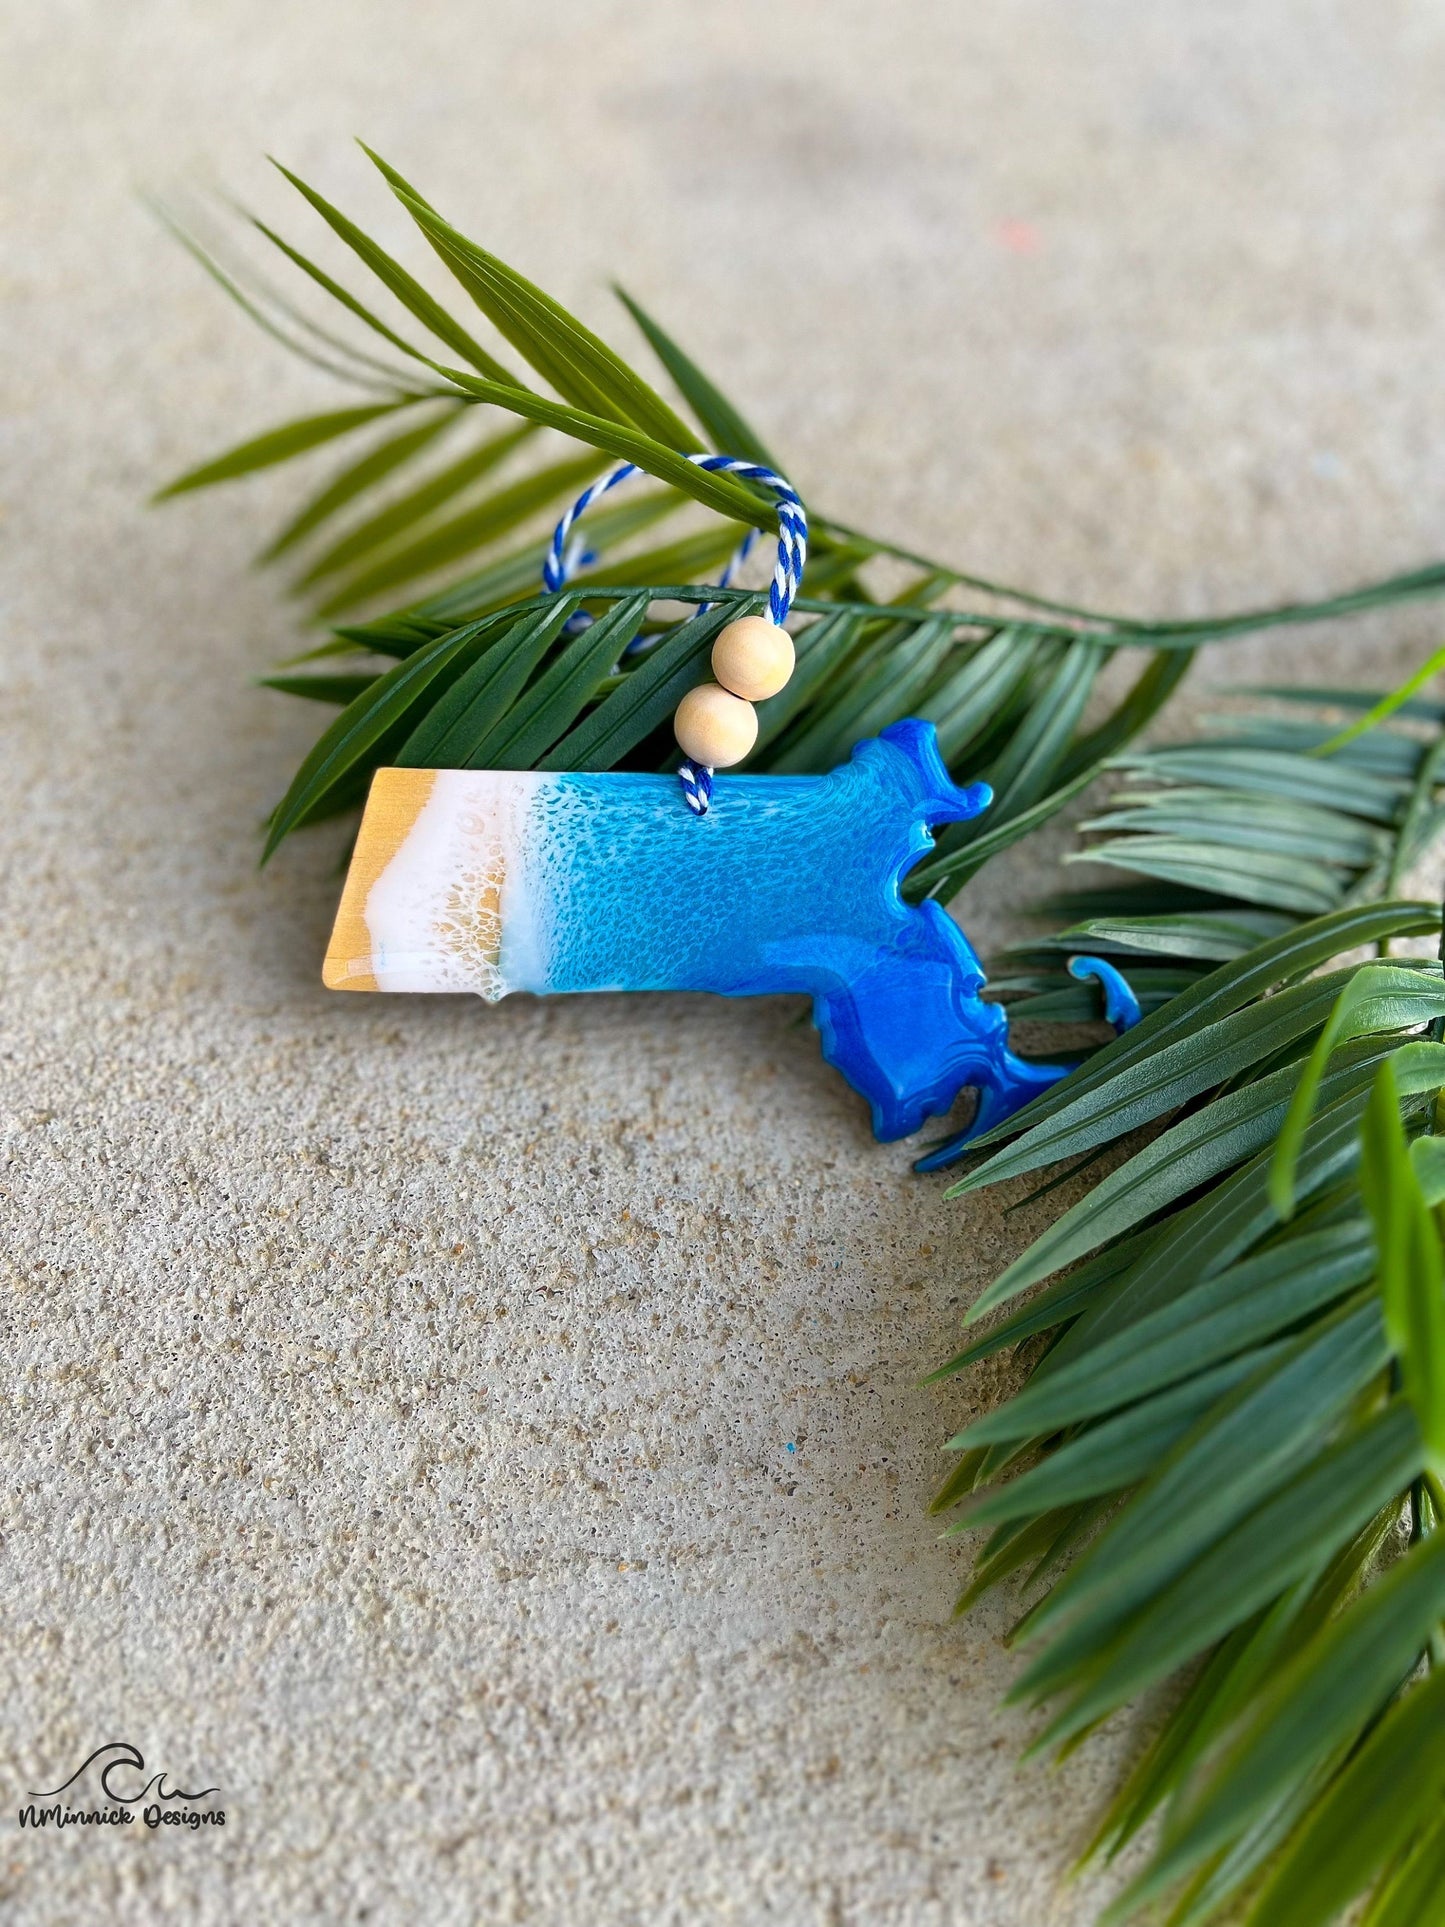 Massachusetts Ornament with ocean resin art laying against palm leaves.